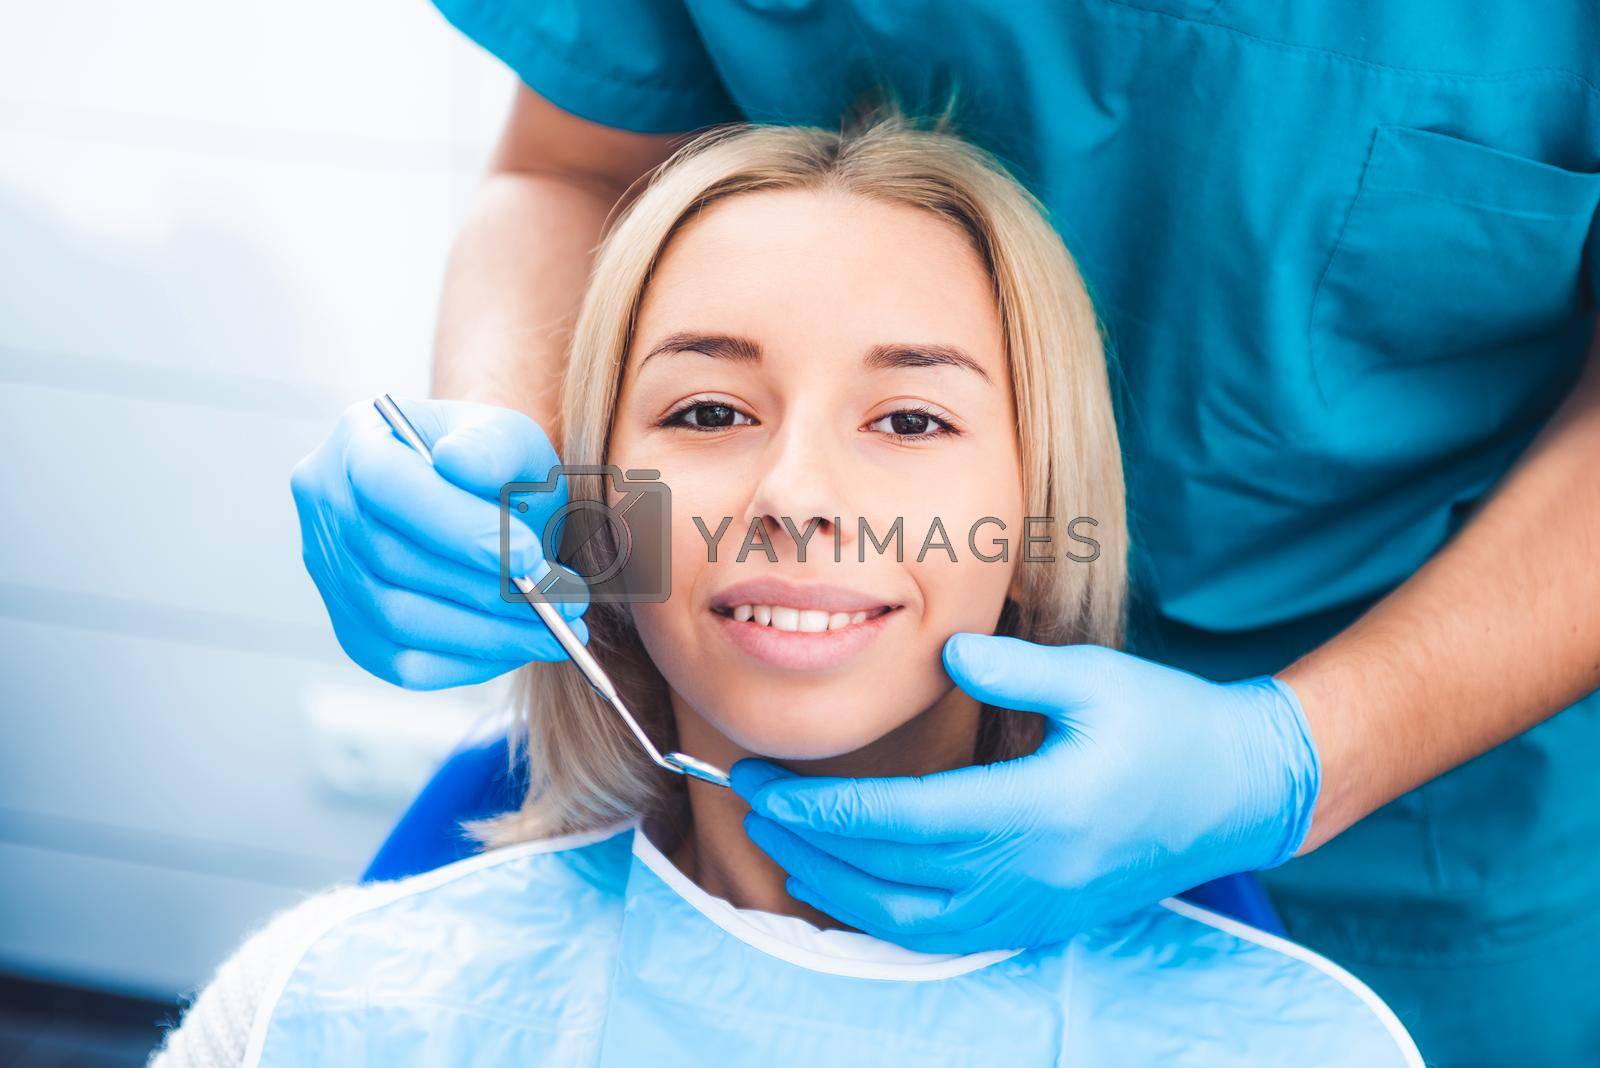 Dentist examinating blond girl with tools